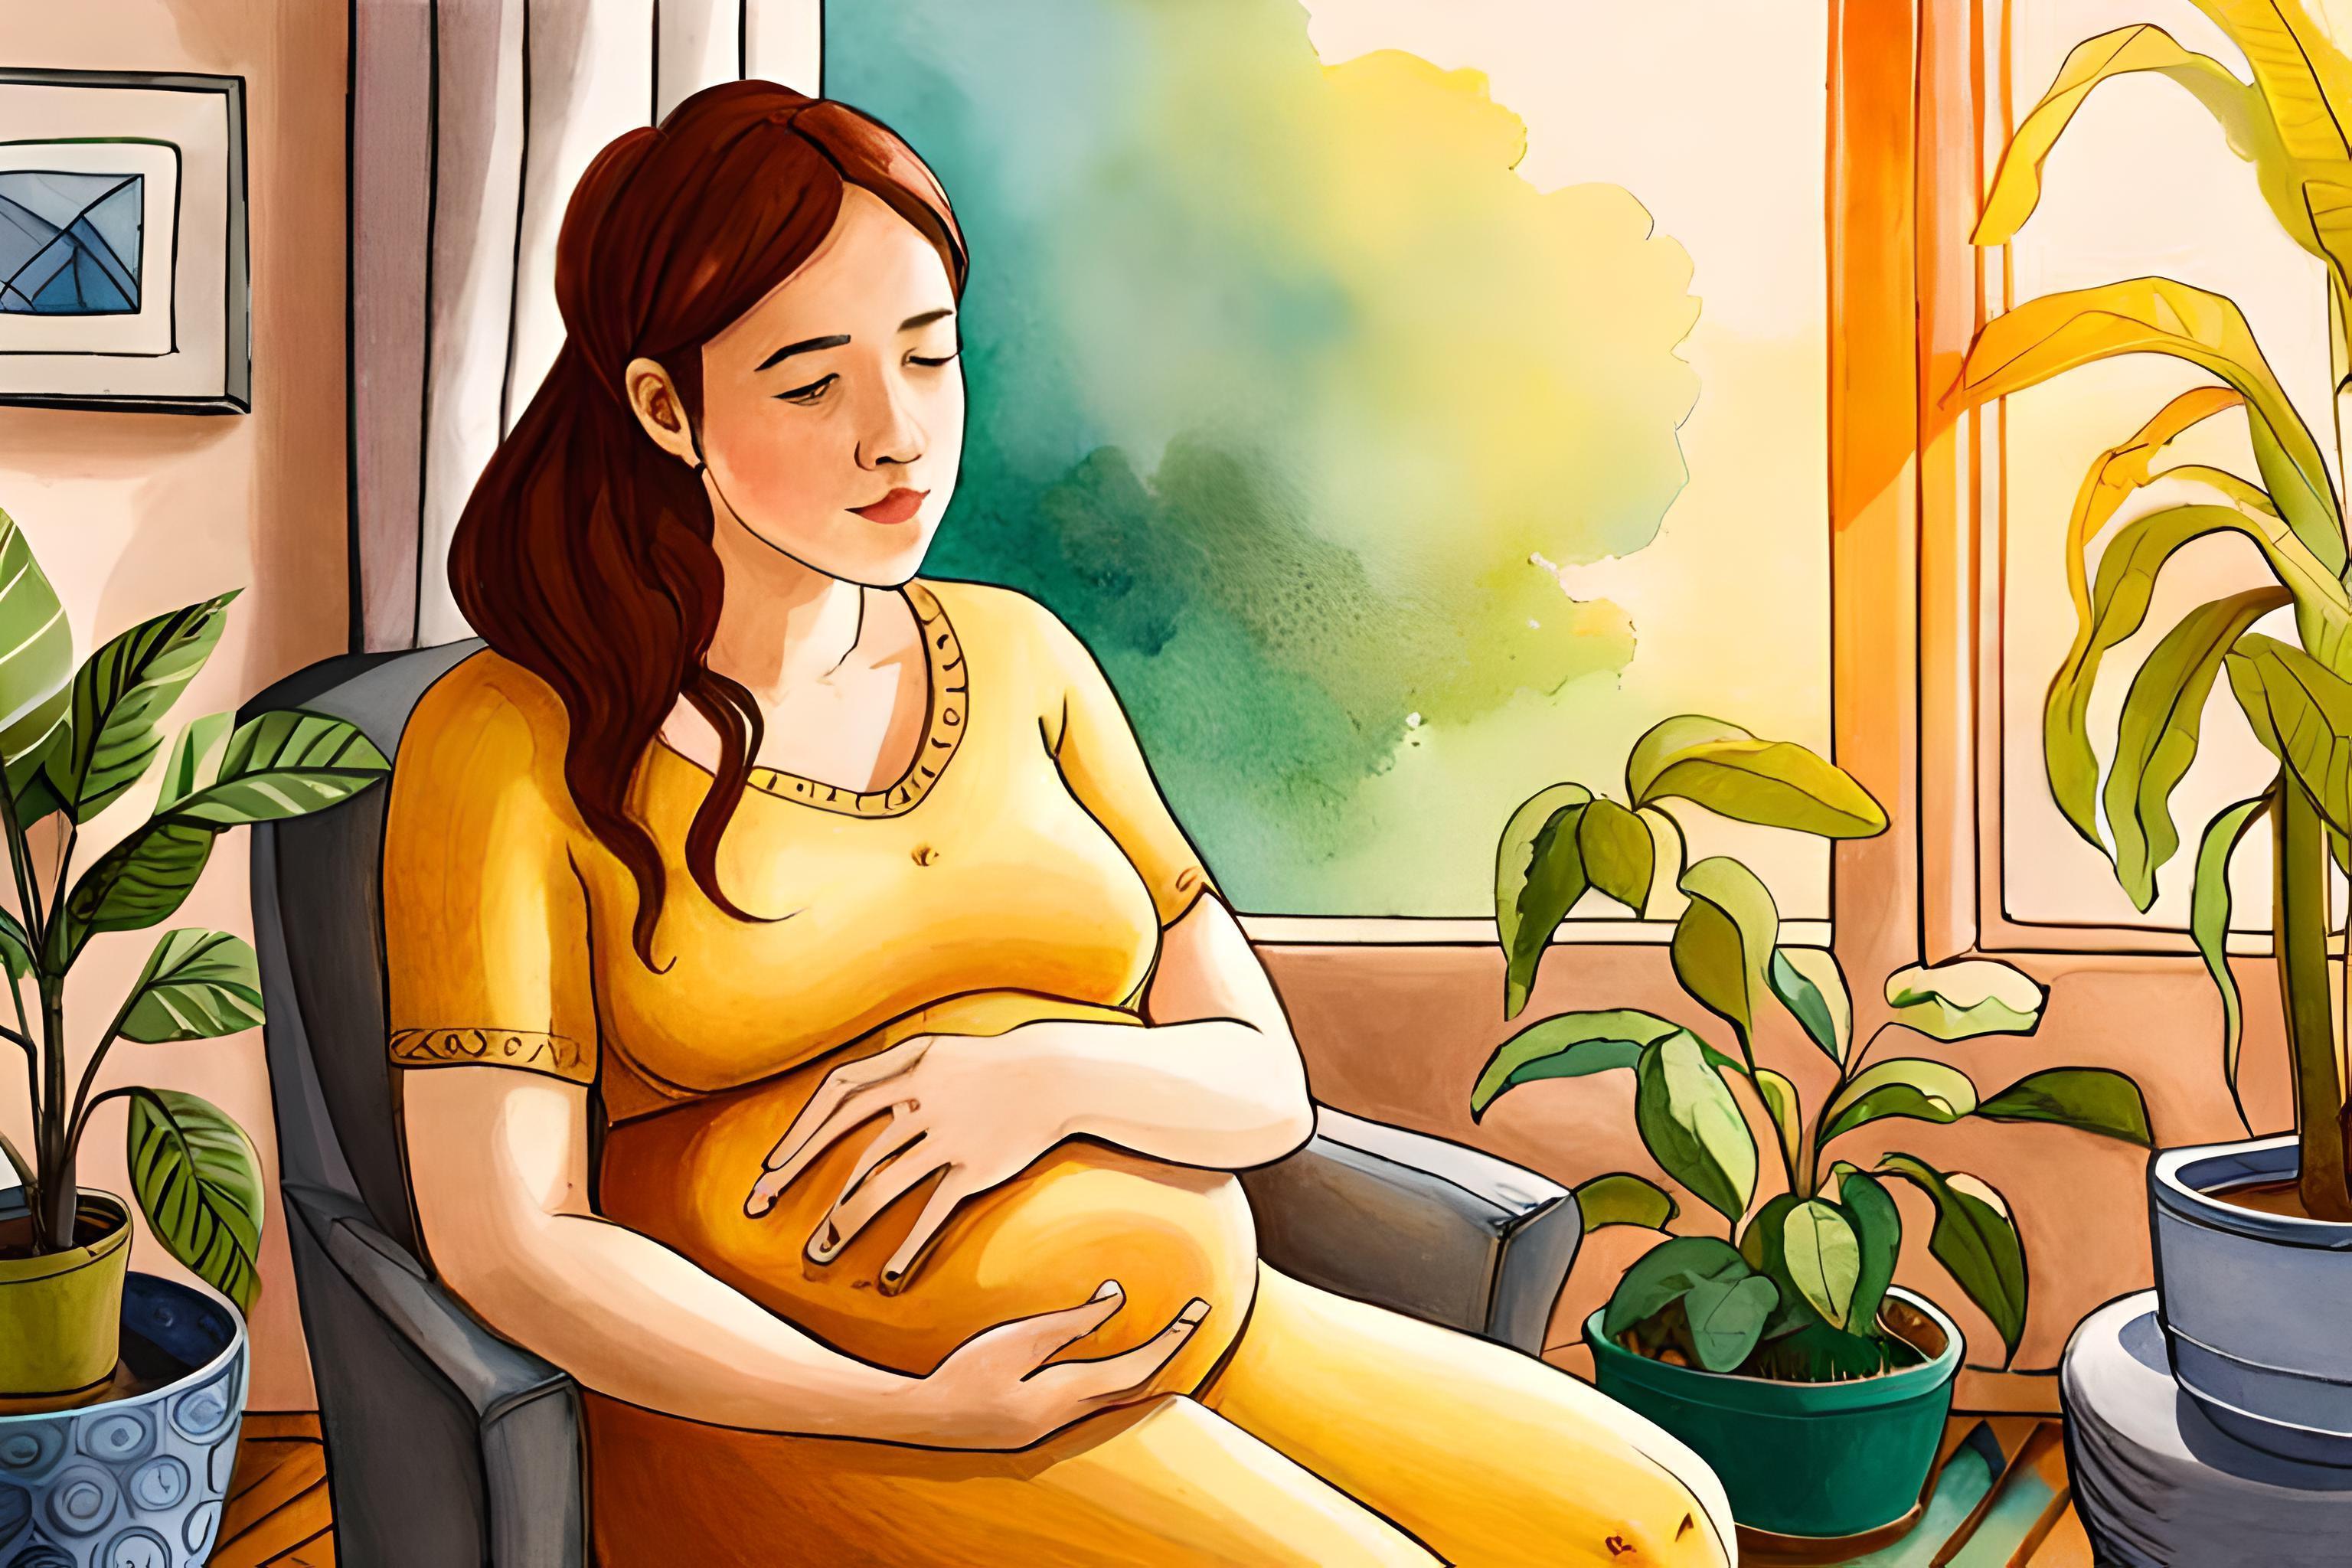 Morning Sickness During Pregnancy: What You Need to Know - 4aKid